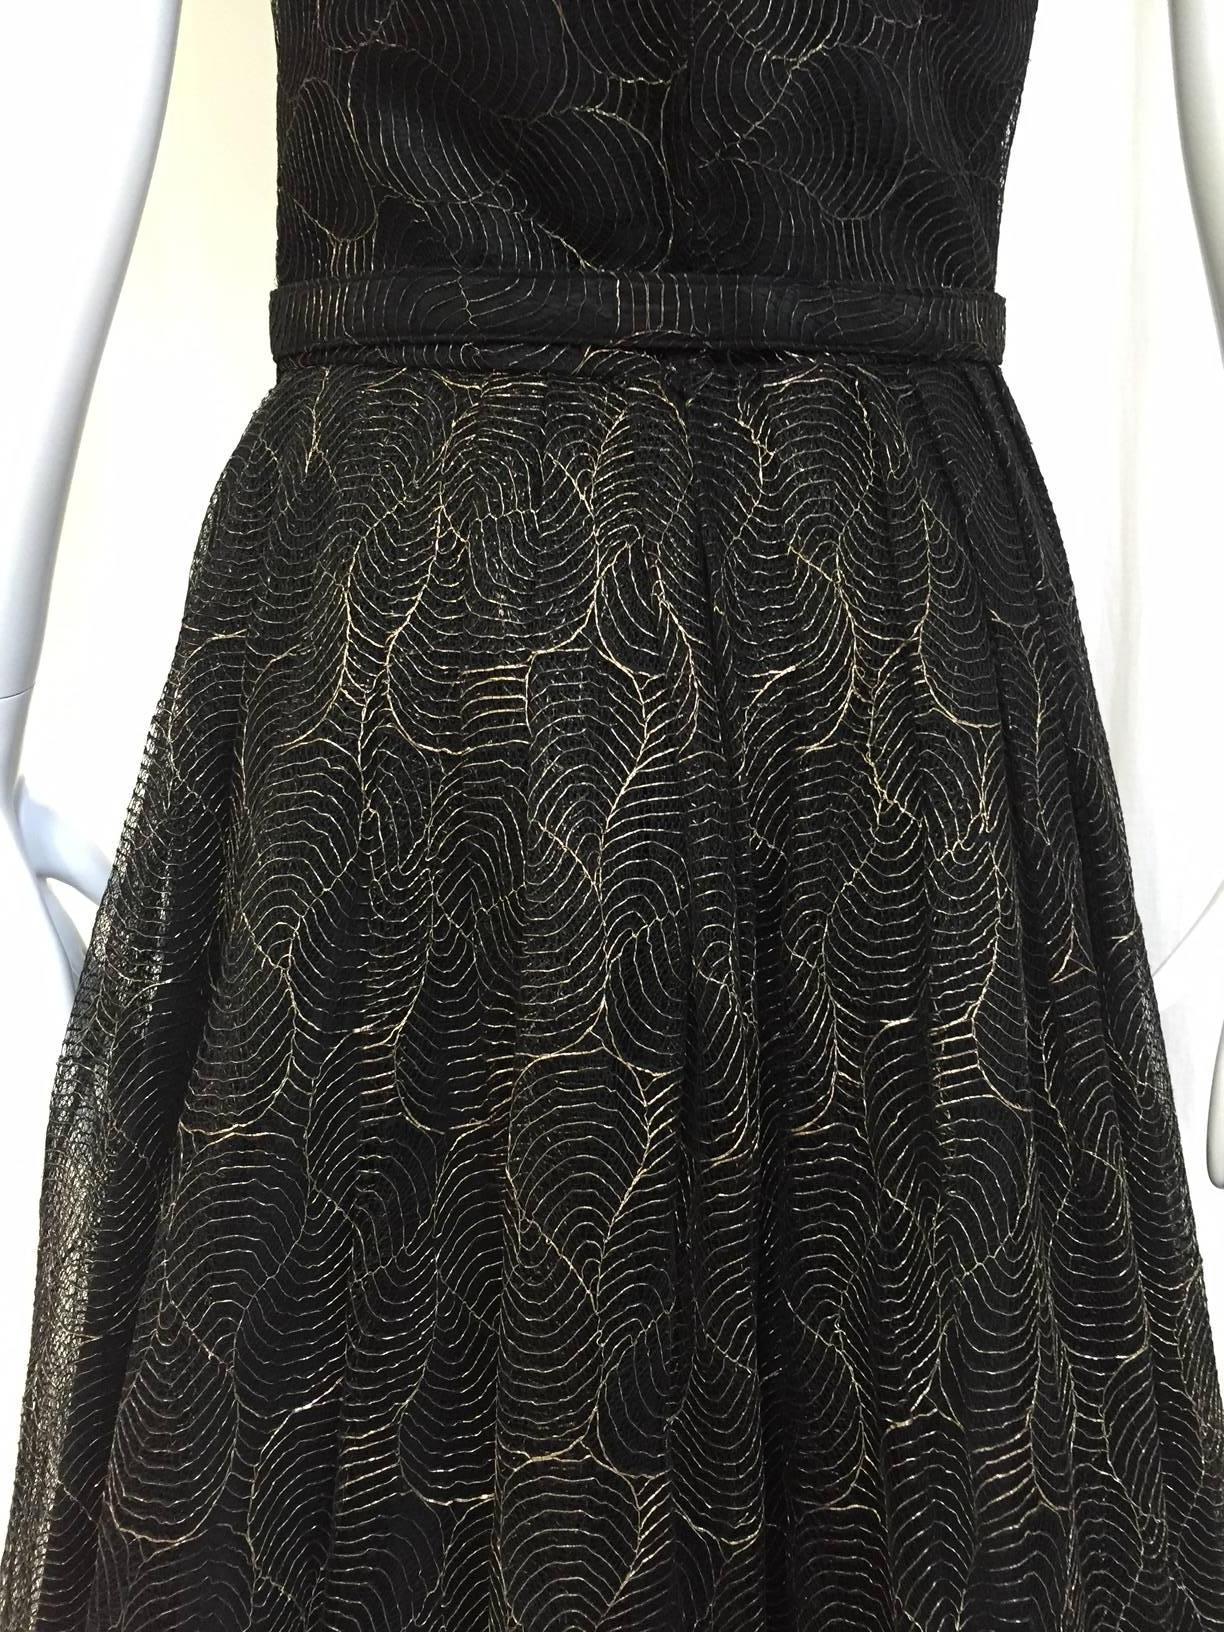 1950s Black and gold lace cocktail dress with belt. excellent condition.
Bust: 34